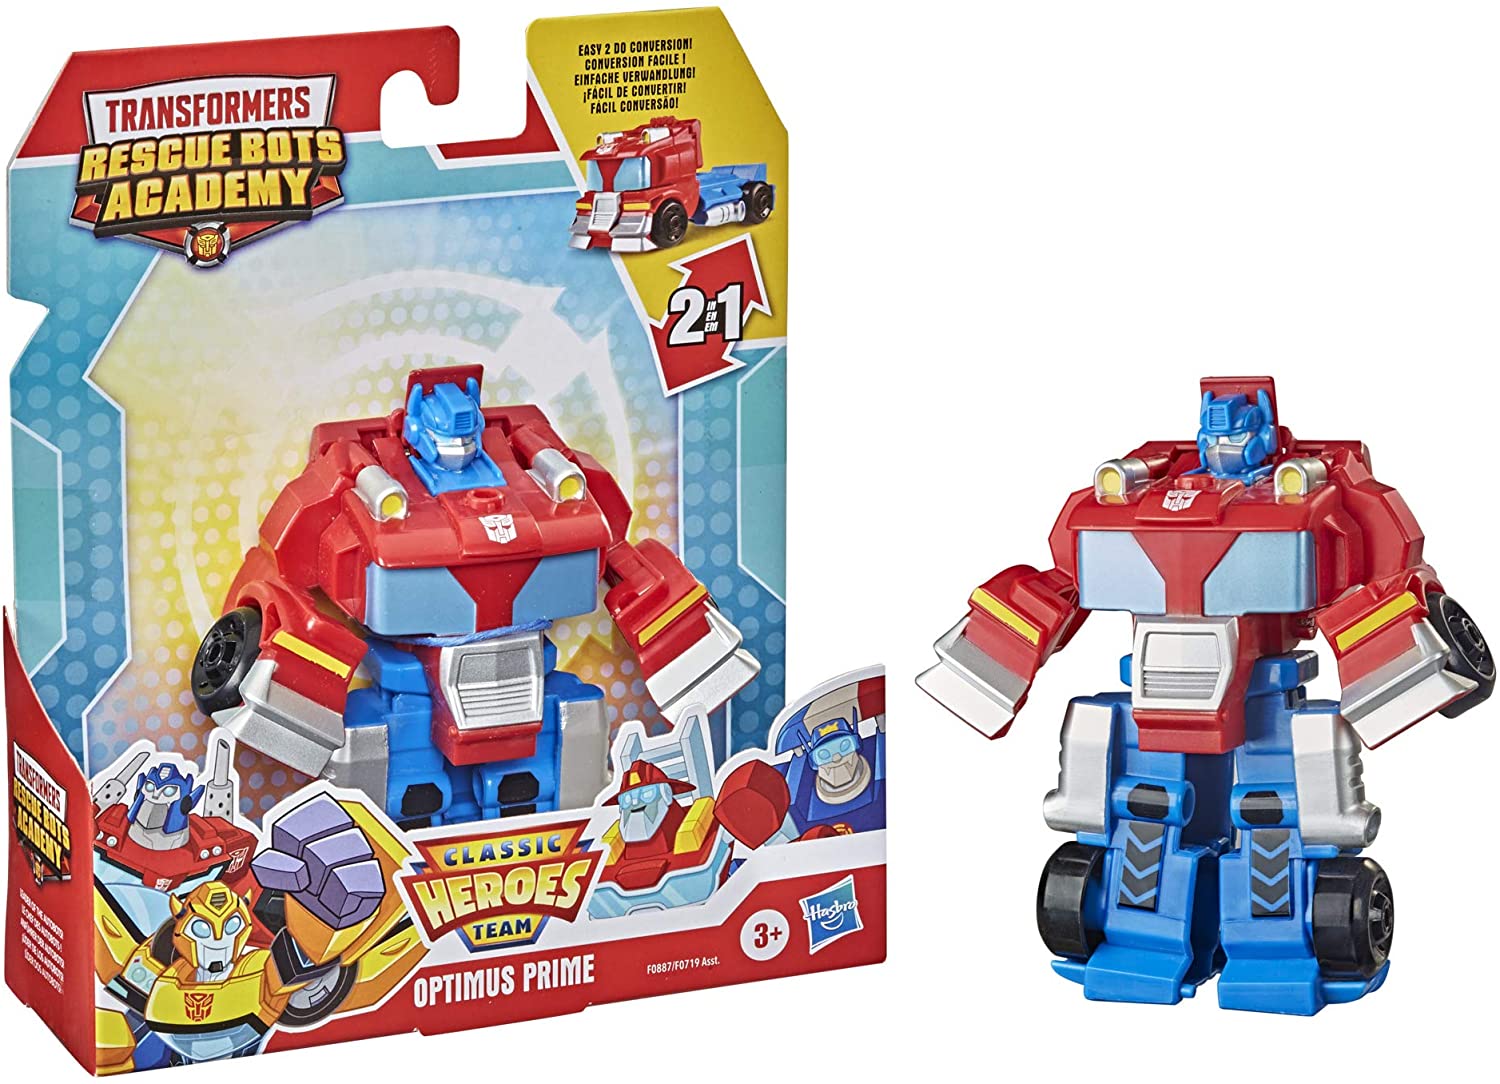 Playskool Transformers Rescue Bot Academy Rescue Team 4.5" Converting Fig. 4pk 